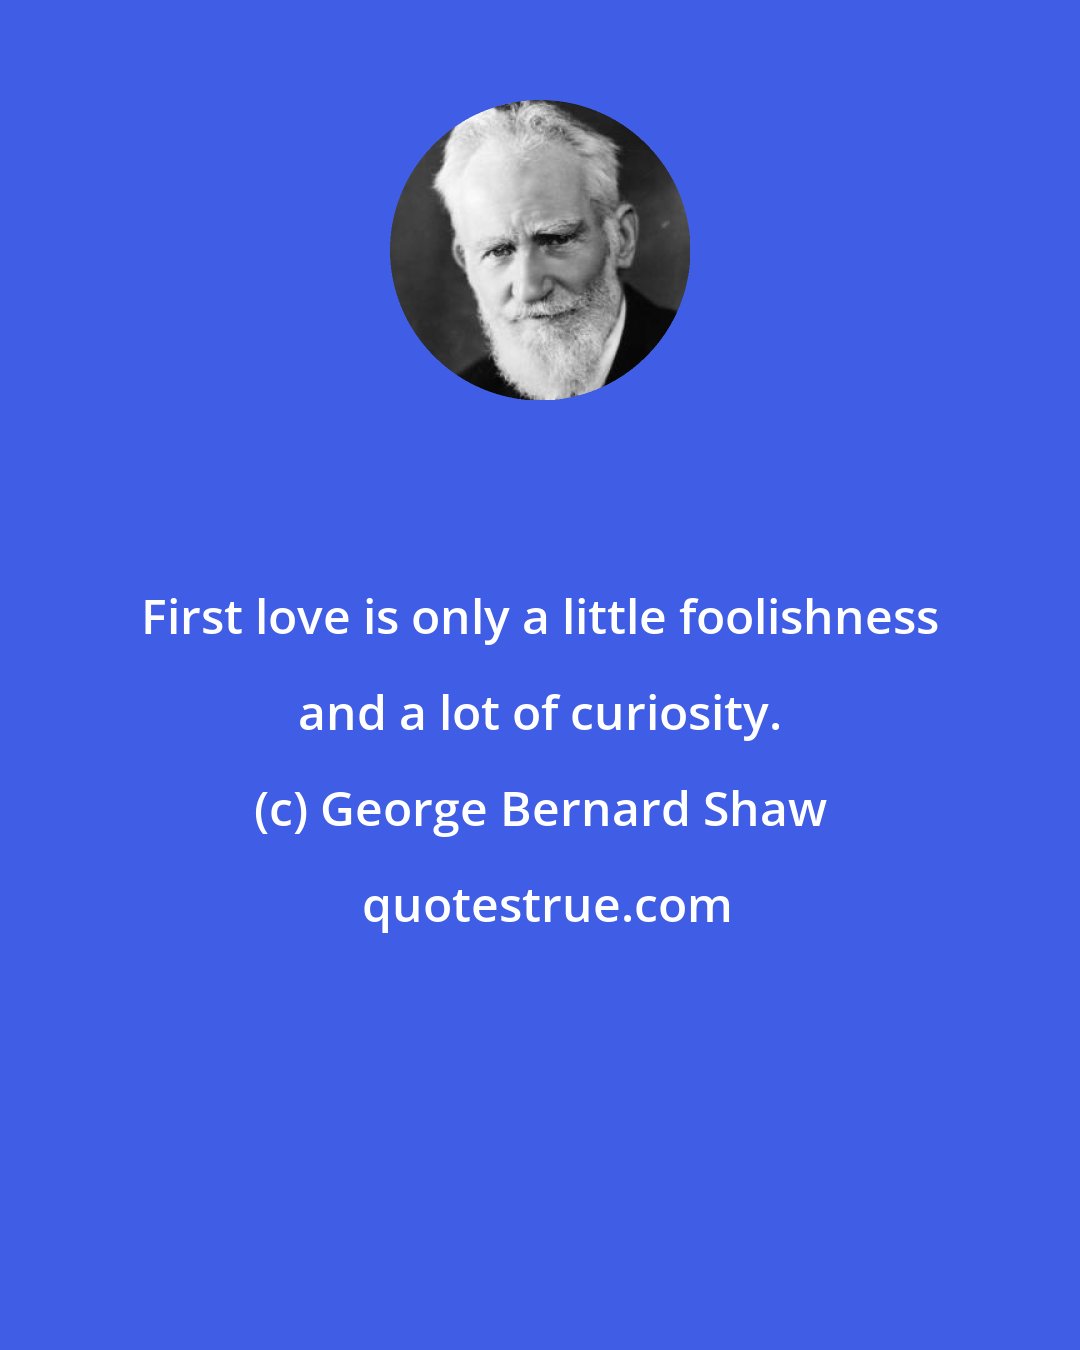 George Bernard Shaw: First love is only a little foolishness and a lot of curiosity.